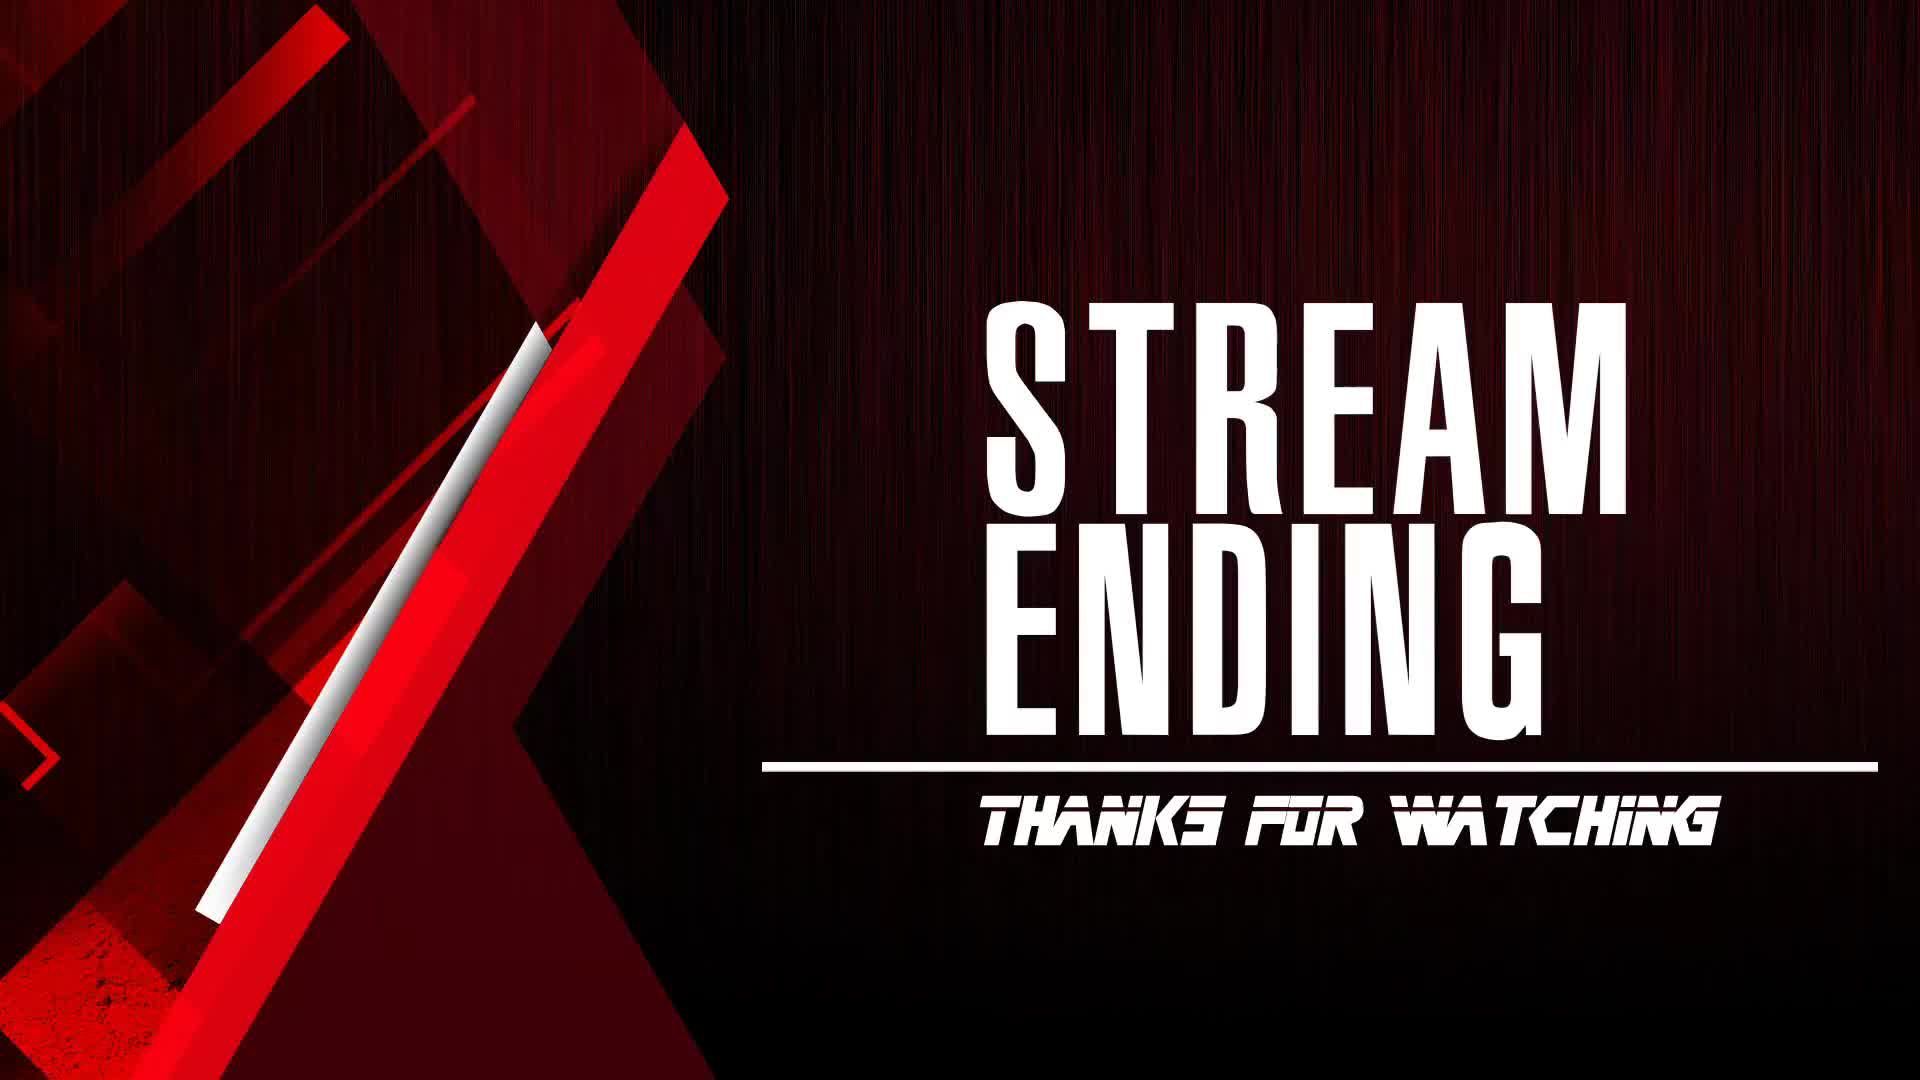 Ending Stream Picture